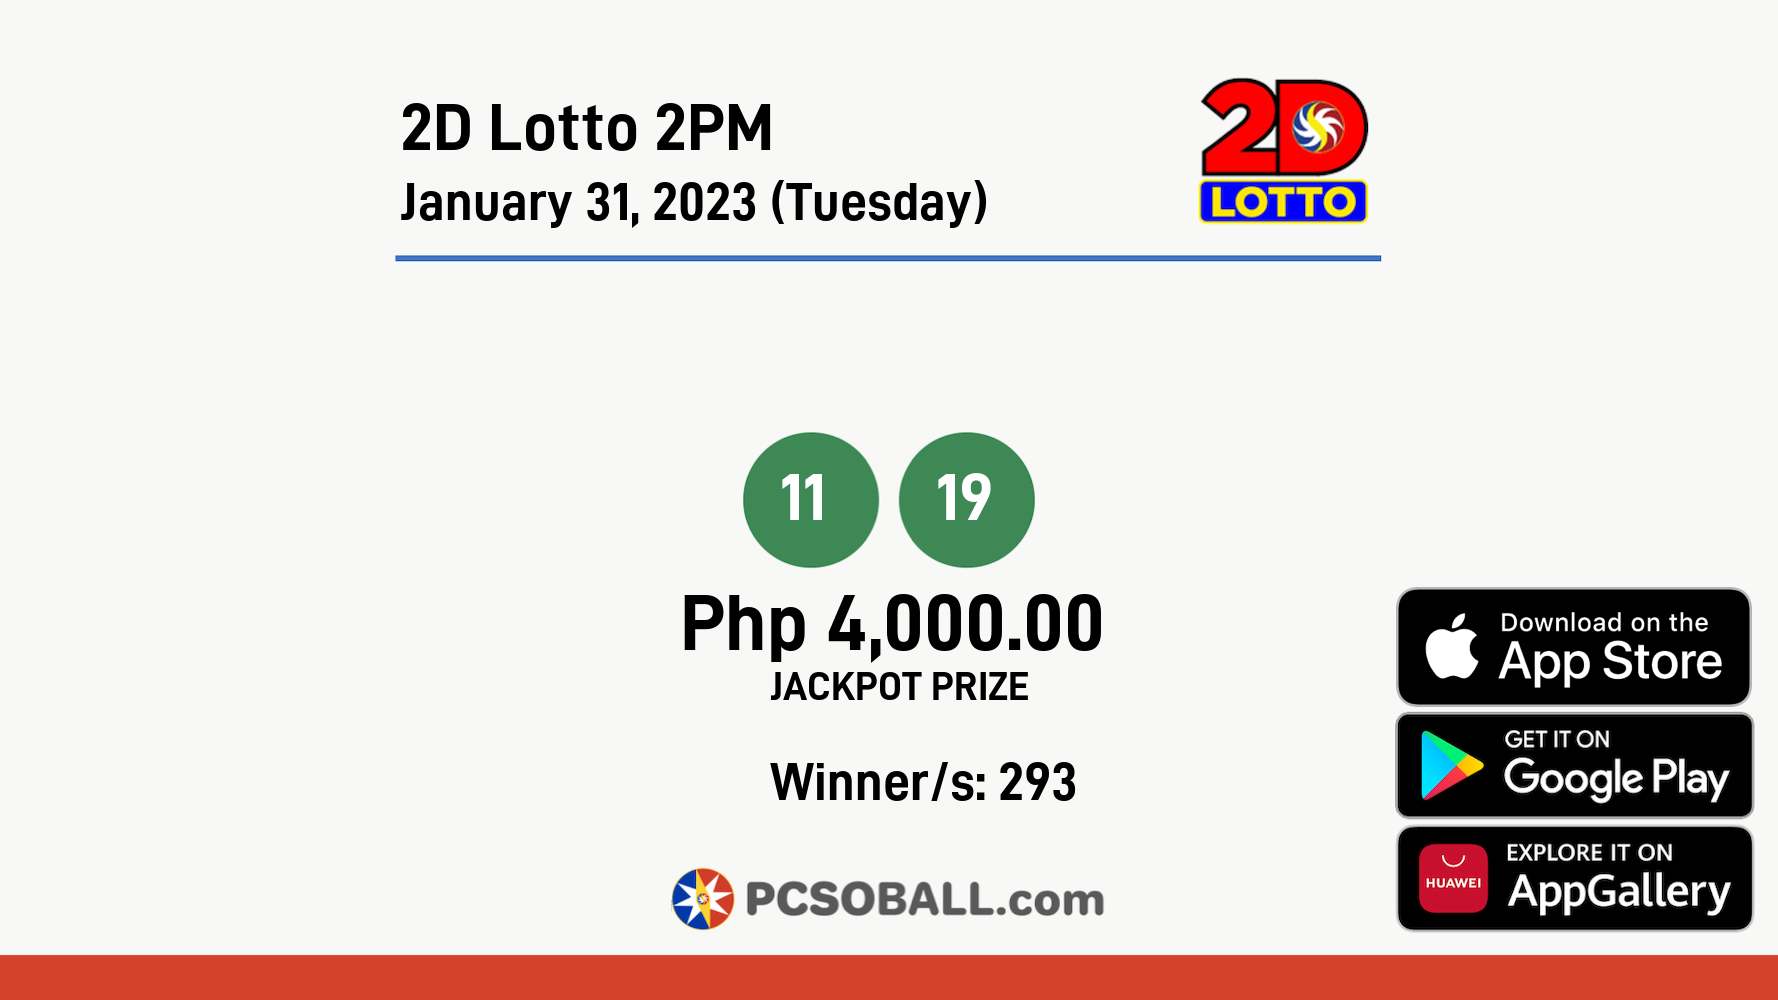 2D Lotto 2PM January 31, 2023 (Tuesday) Result